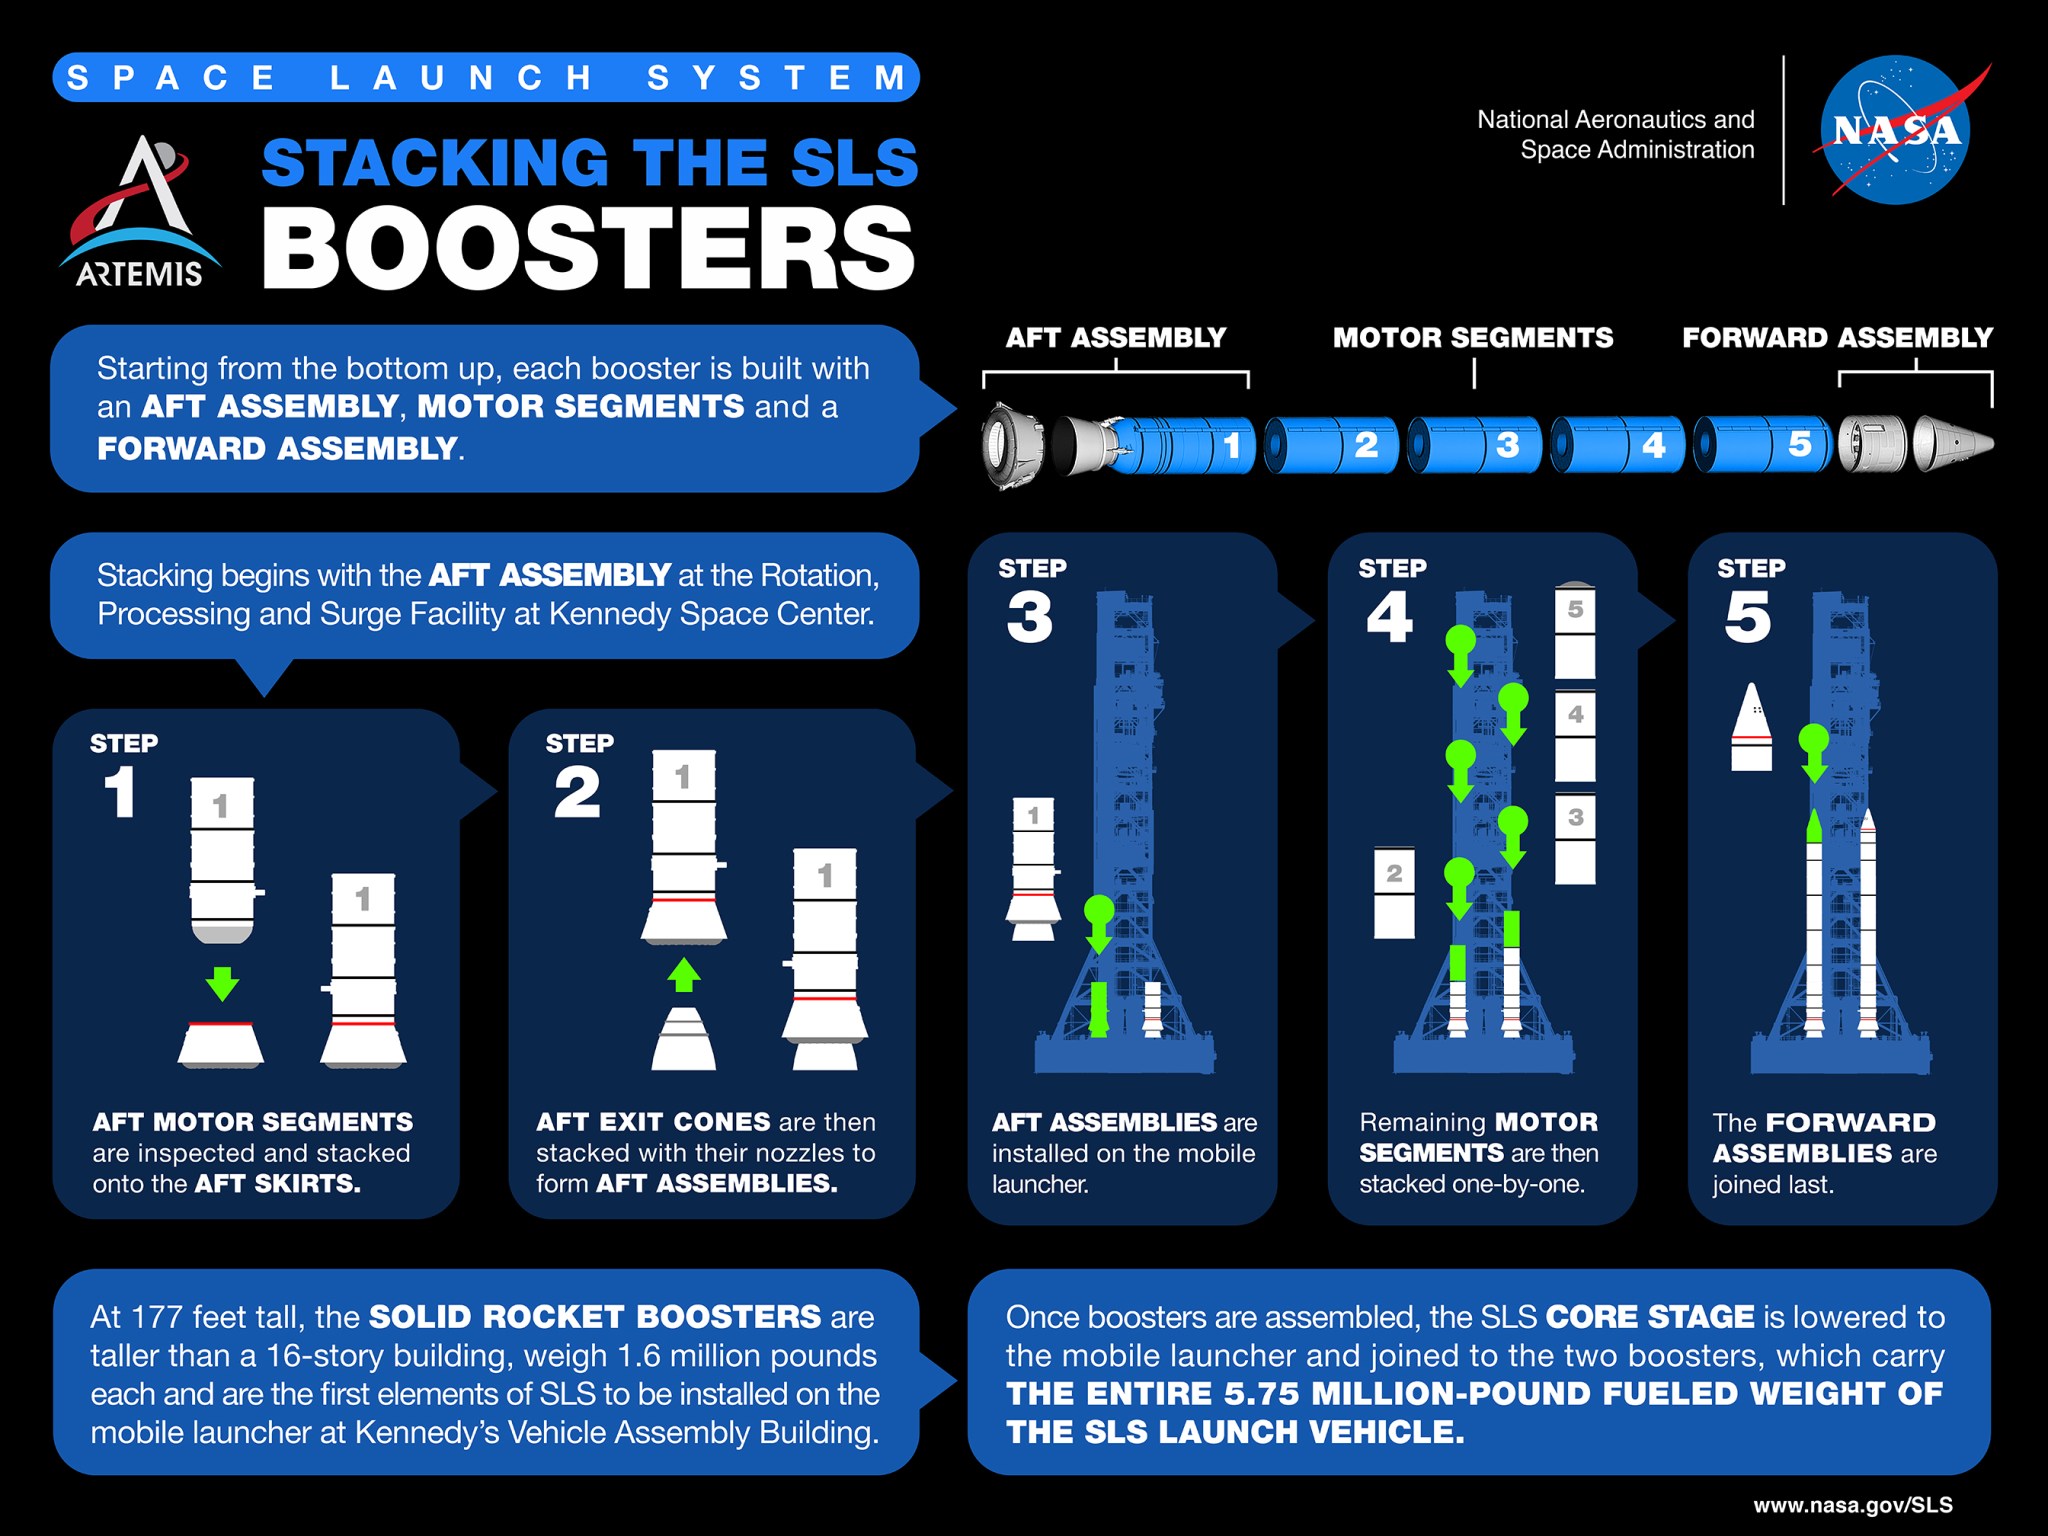 Space Launch System Booster Stacking Infographic